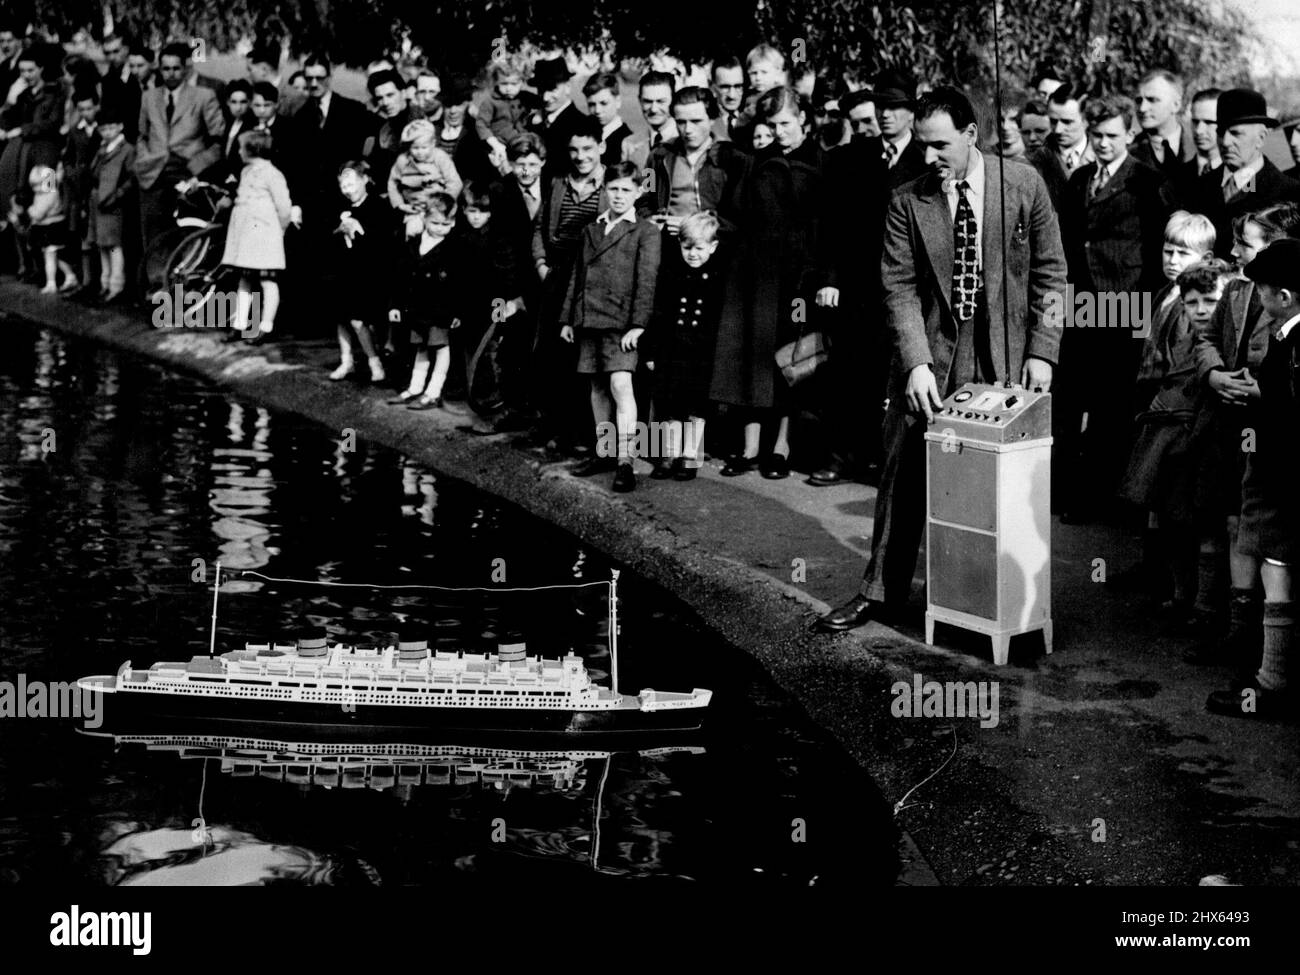 This Queen Mary Has Radio Control -- Ashore the radio controlled Queen Mary attracts a large crowd as Mr. Pyser removes the "upper deck" at prince of Wales' pond, Blackheath. Model boat enthusiasts and pool side strollers got a surprise the other day when they saw a perfect scale model of the liner "Queen Mary" ploughing steadily across the "Ocean" of prince of Wales Pond, Blackheath. The ship turned, went astern and even hove to off shore, with only the radio antennae to give a clus as to how i Stock Photo